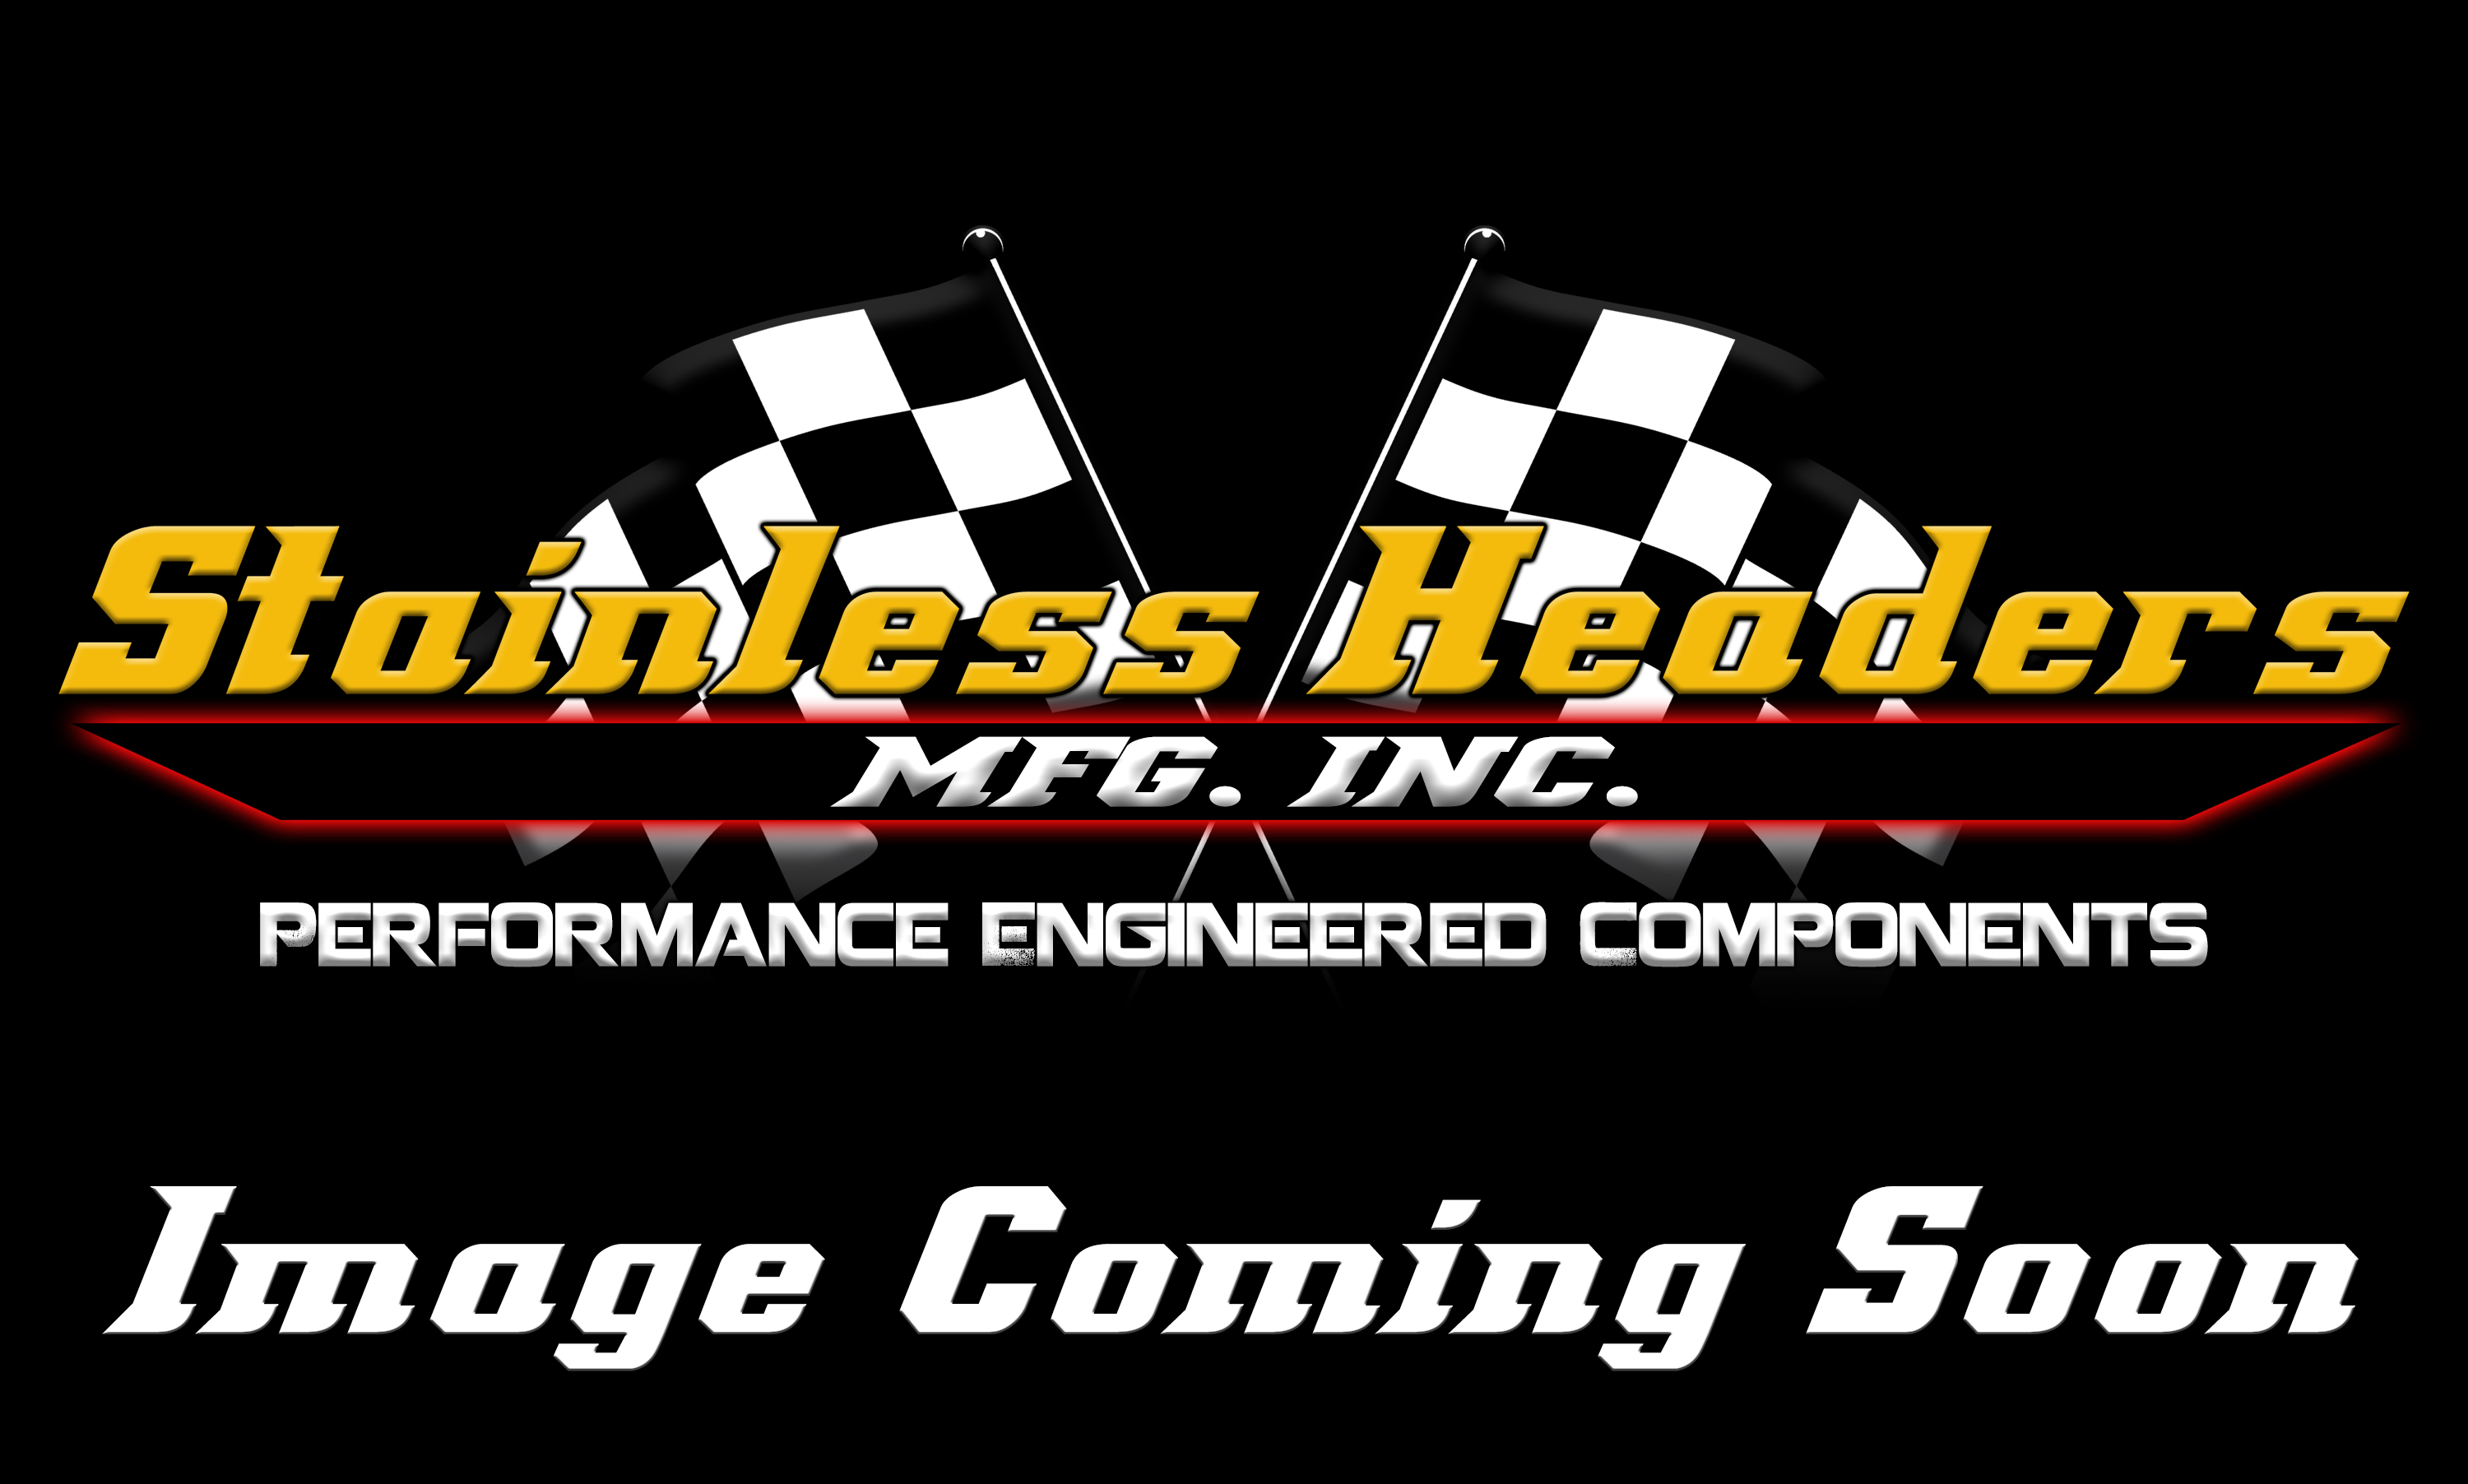 Stainless Headers - 2 1/4" Primary 8 into 1 Performance Merge Collector-16ga 304ss